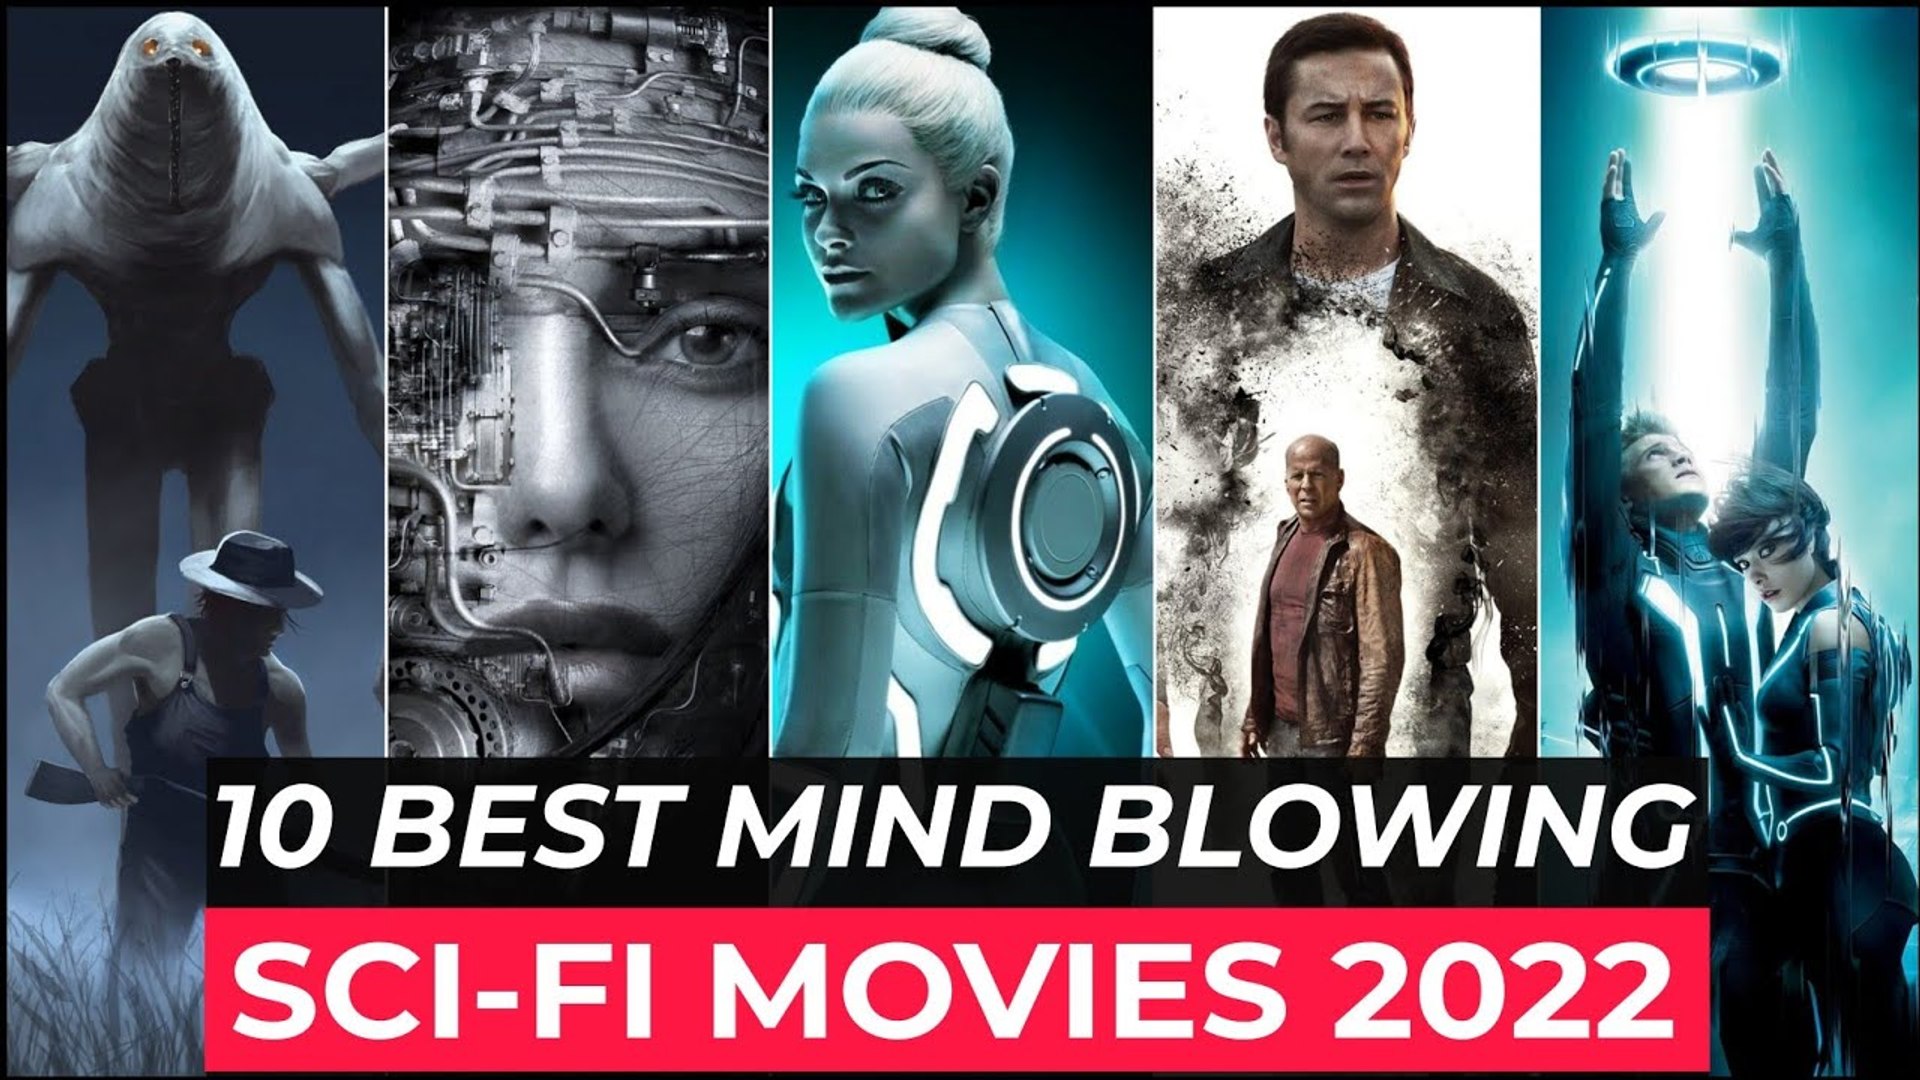 Top 10 Best SCI FI Movies On Netflix, Disney+, Amazon Prime - Best SCI FI  Movies To Watch In 2022 - video Dailymotion